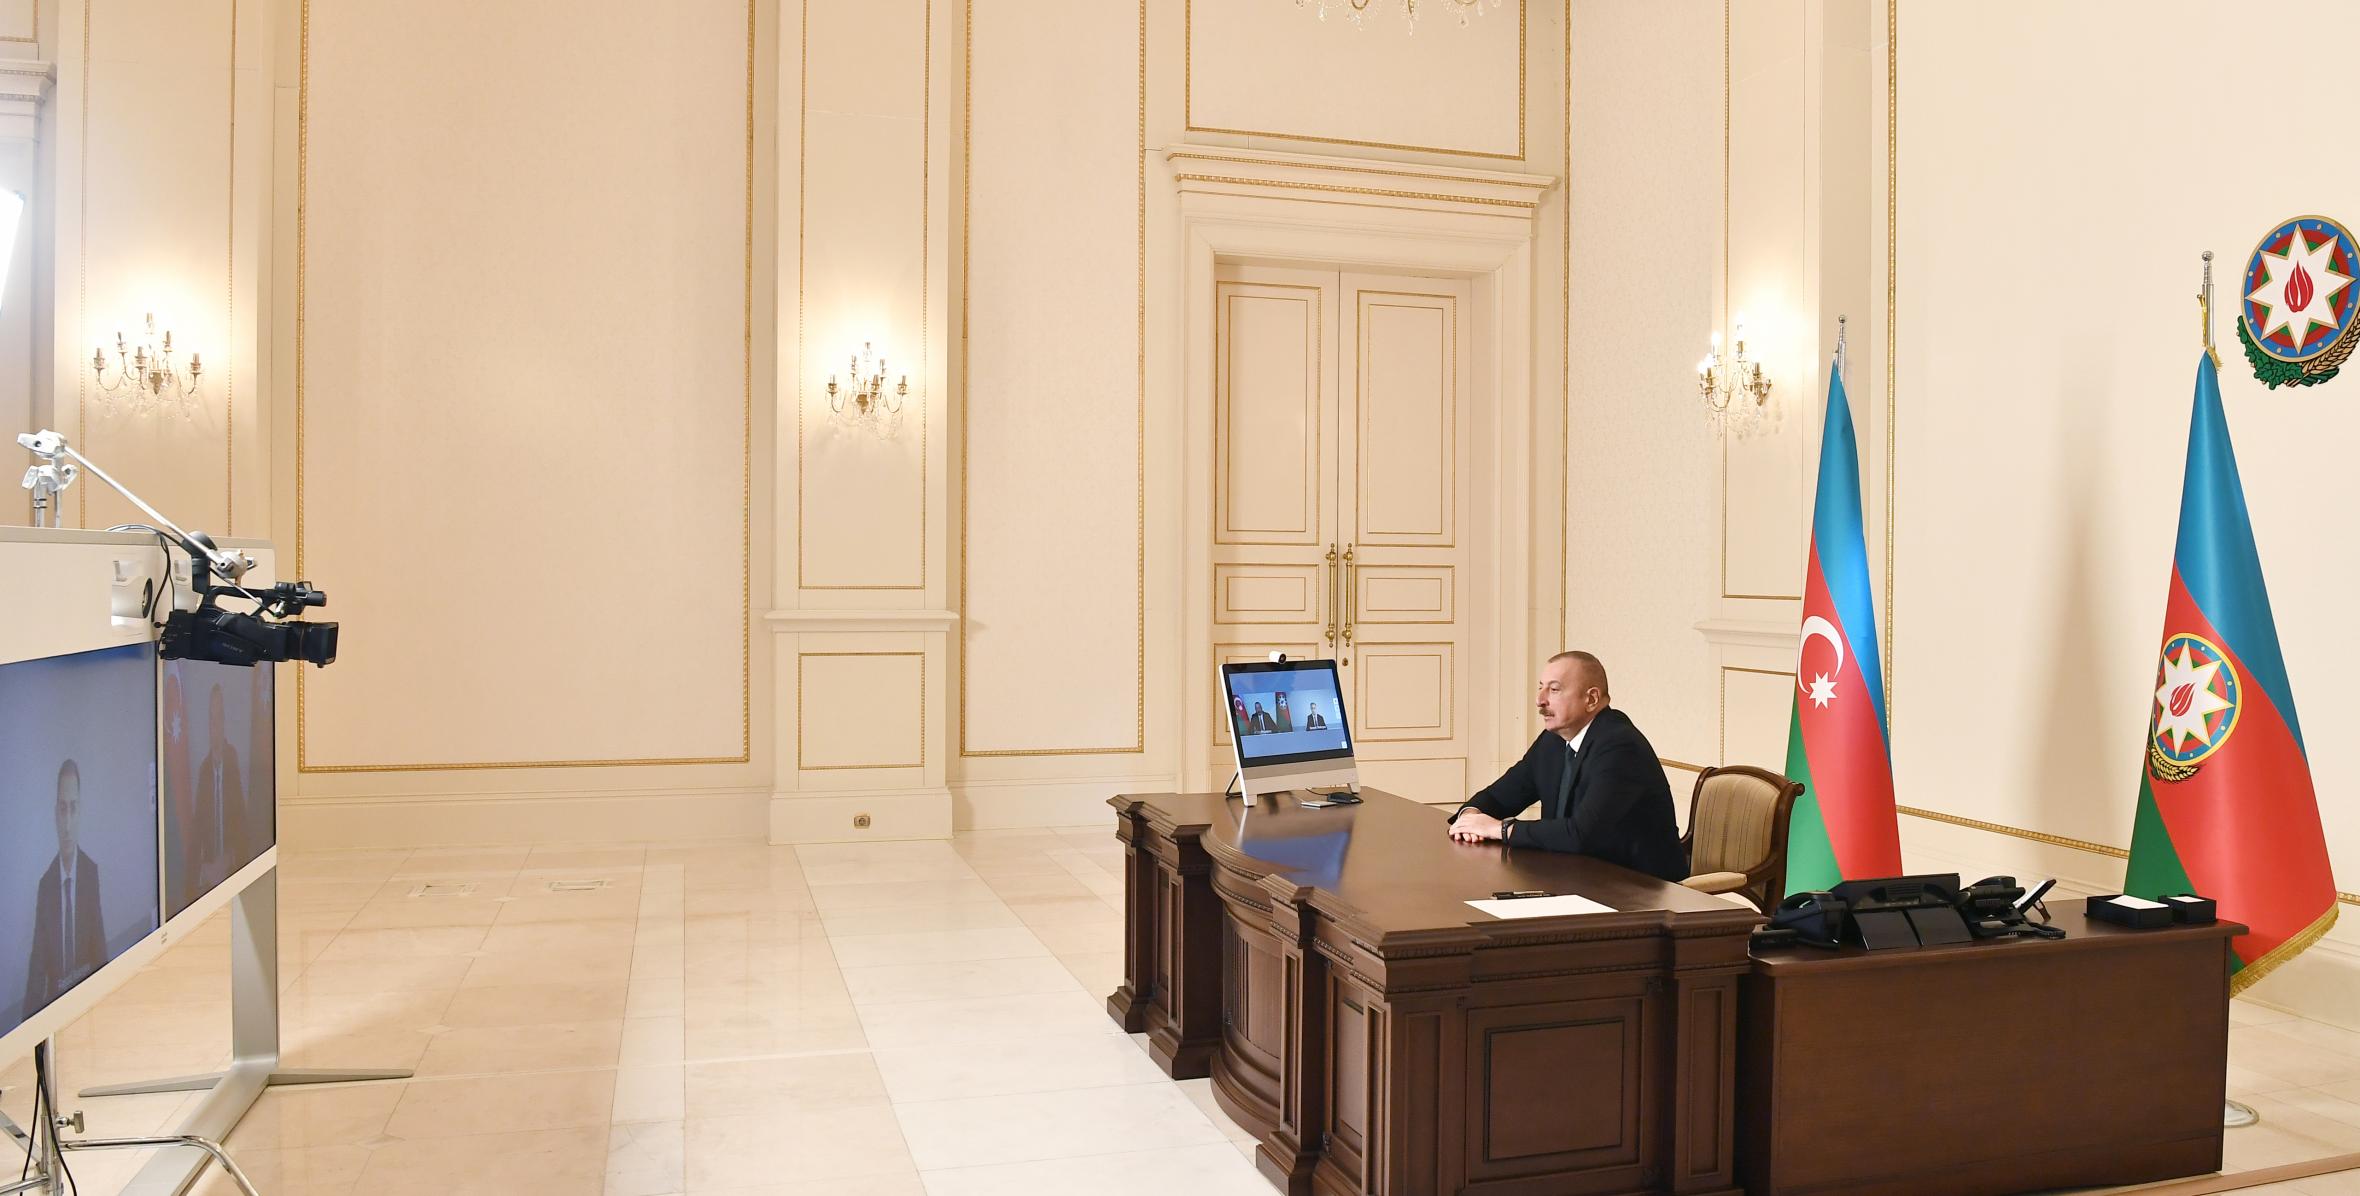 President of the Republic of Azerbaijan Ilham Aliyev has received in a video format Rashad Nabiyev on his appointment as Minister of Transport, Communications and High Technologies.